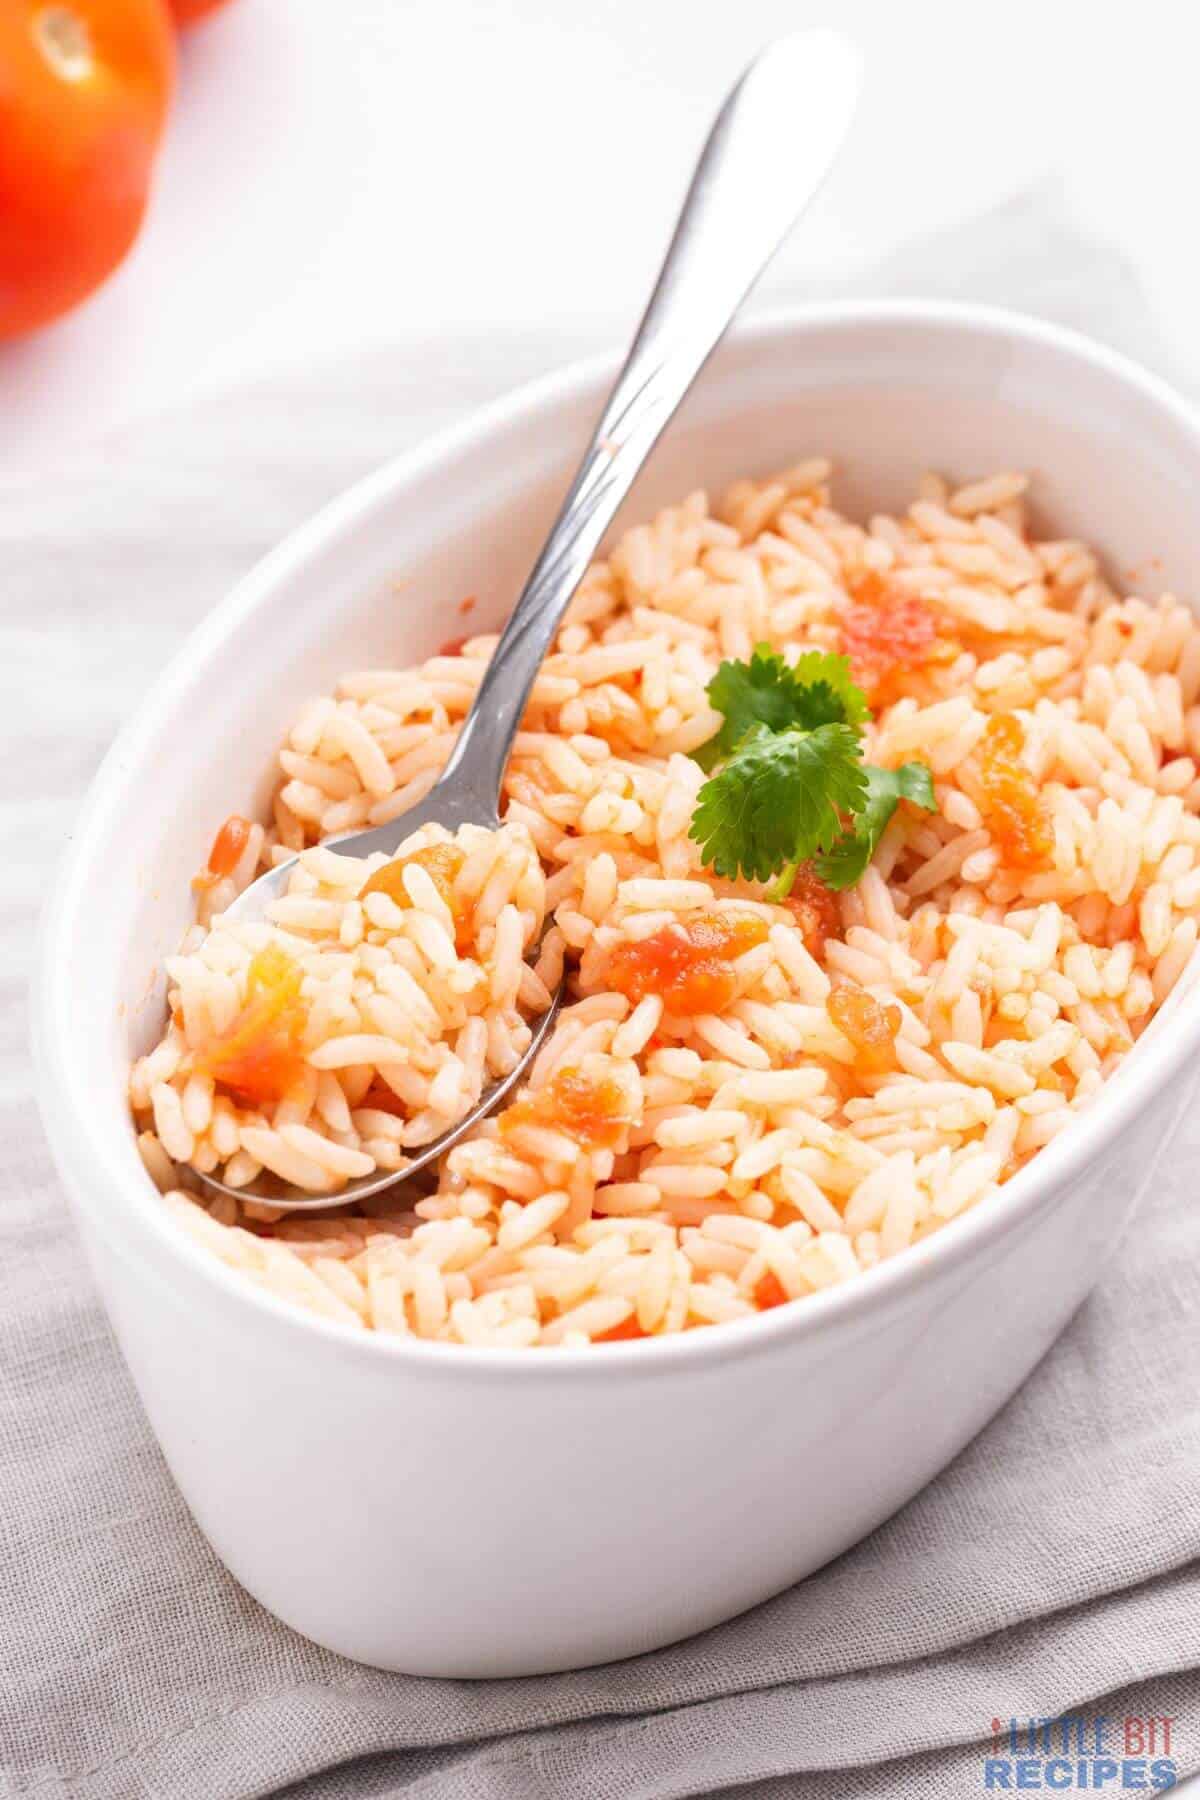 serving spoon in rice dish.